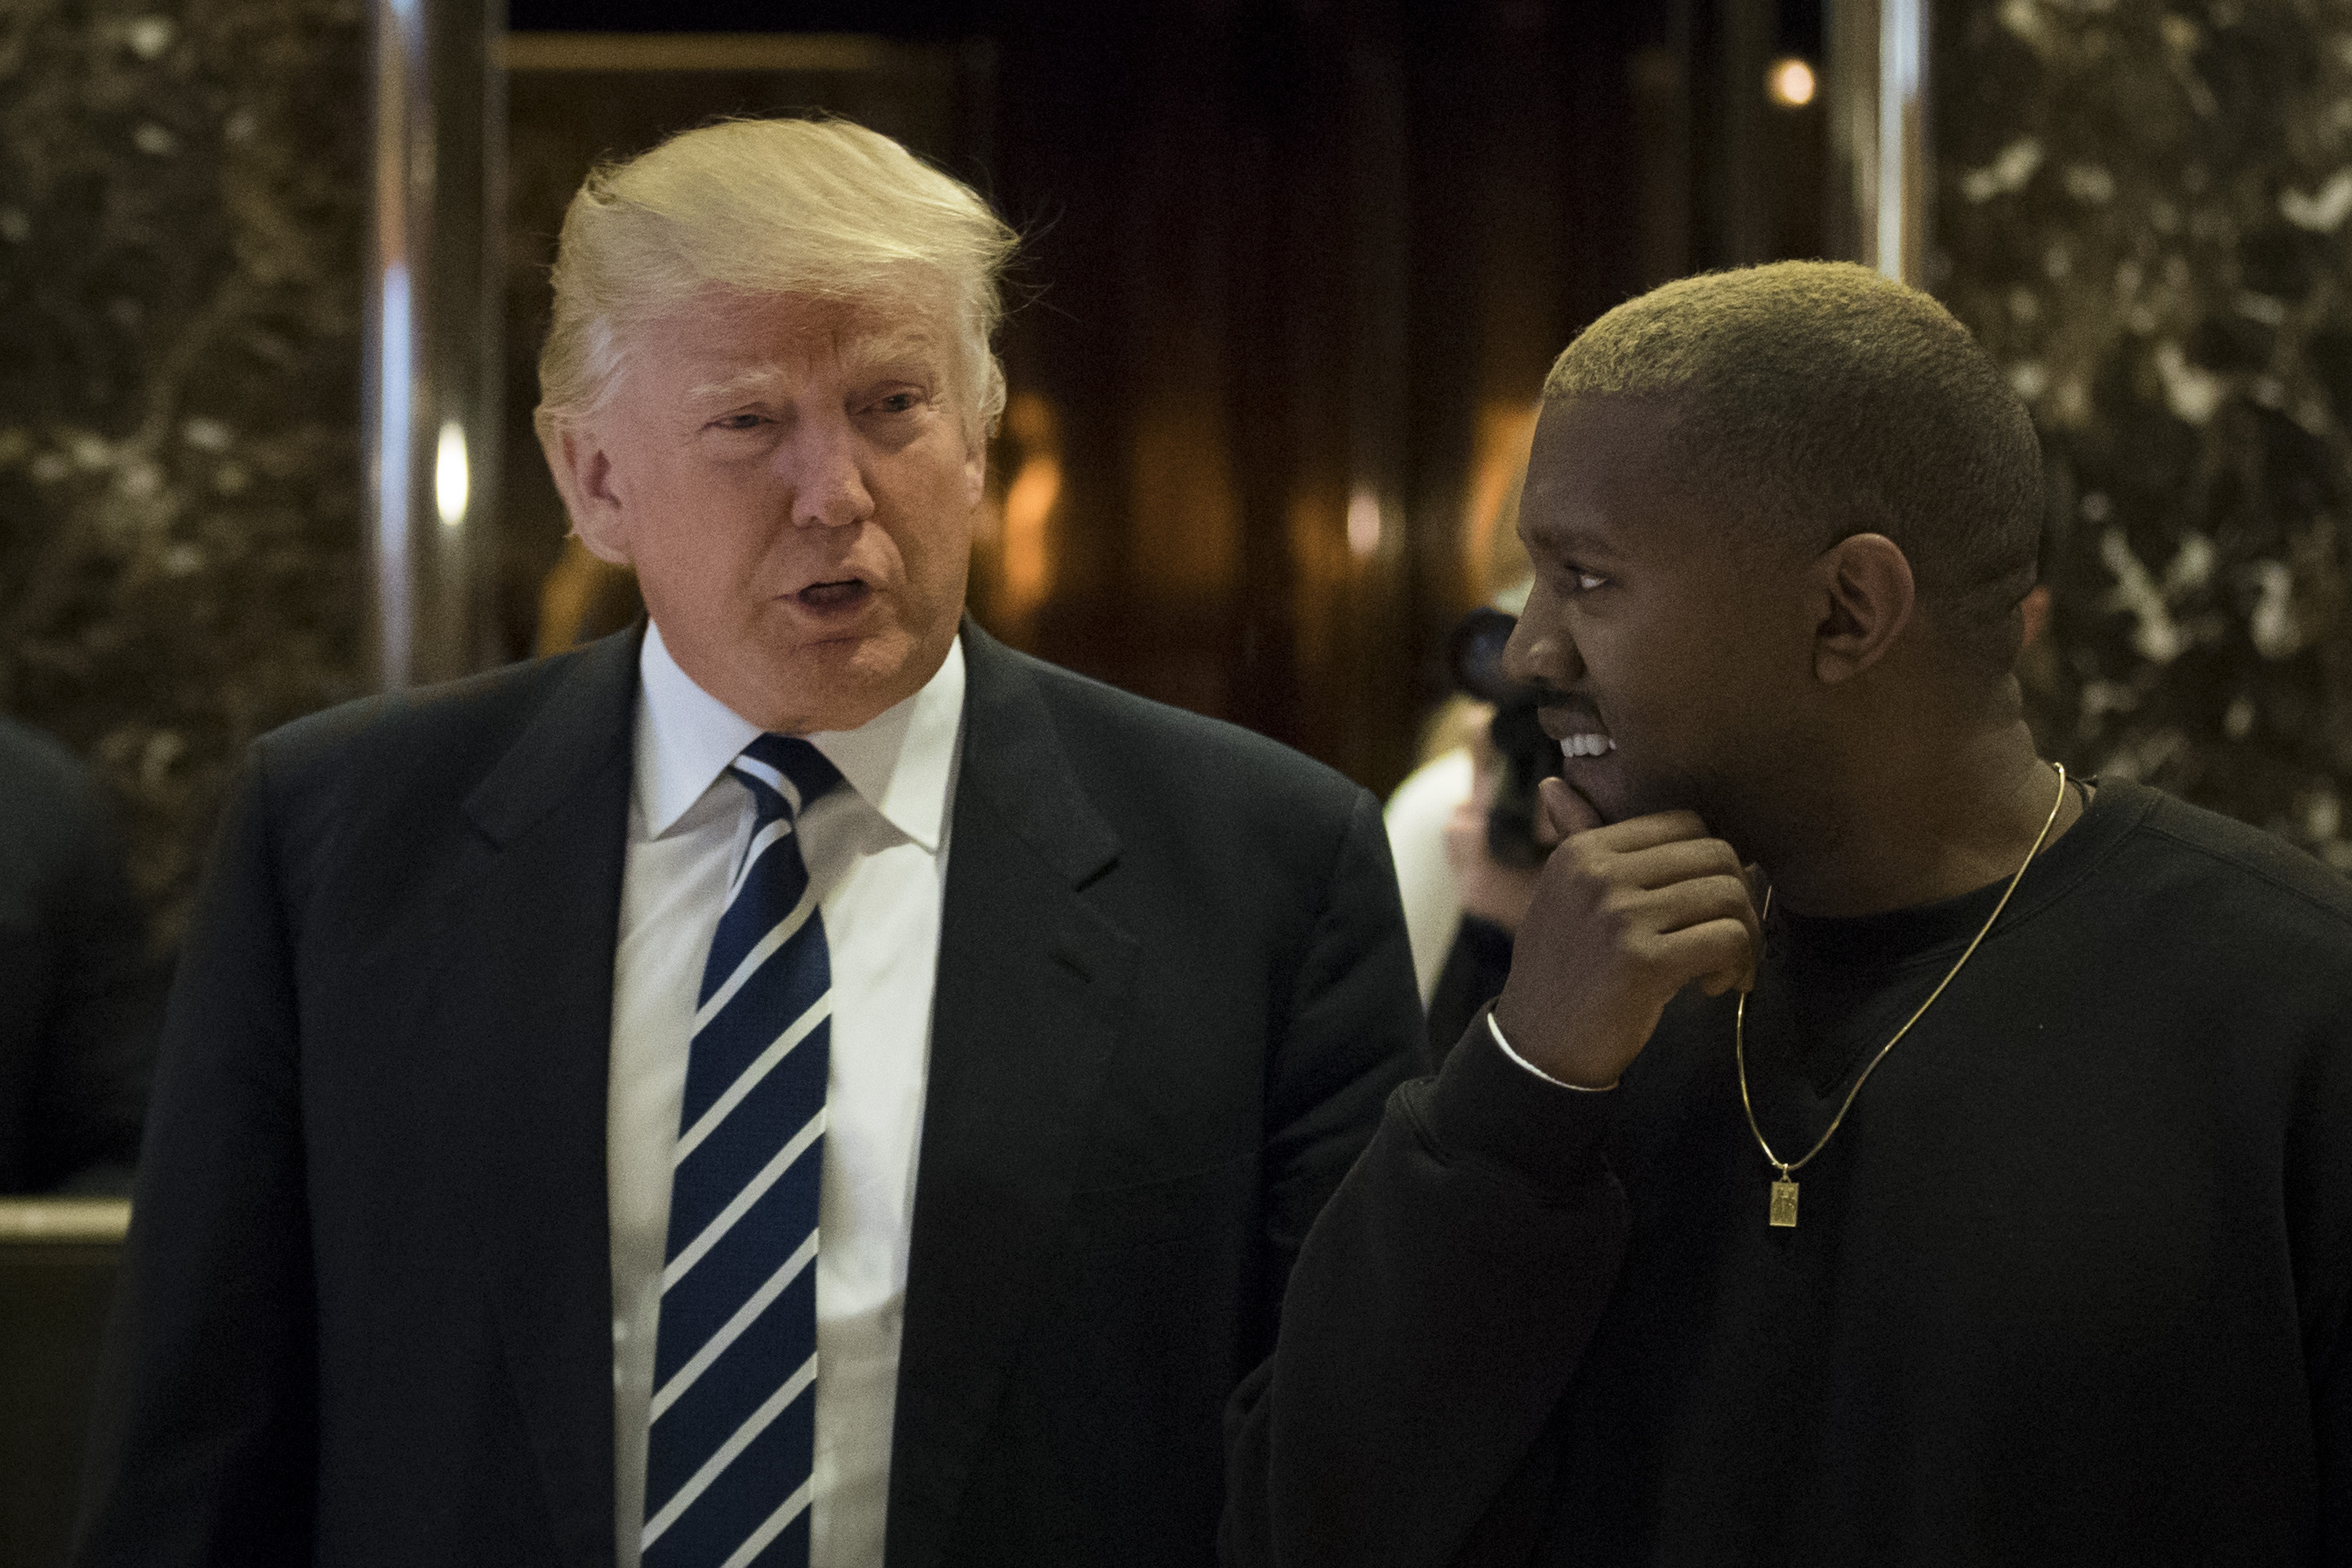 President-elect Donald Trump and Kanye West walk into the lobby at Trump Tower, December 13, 2016 in New York City. (Drew Angerer/Getty Images)